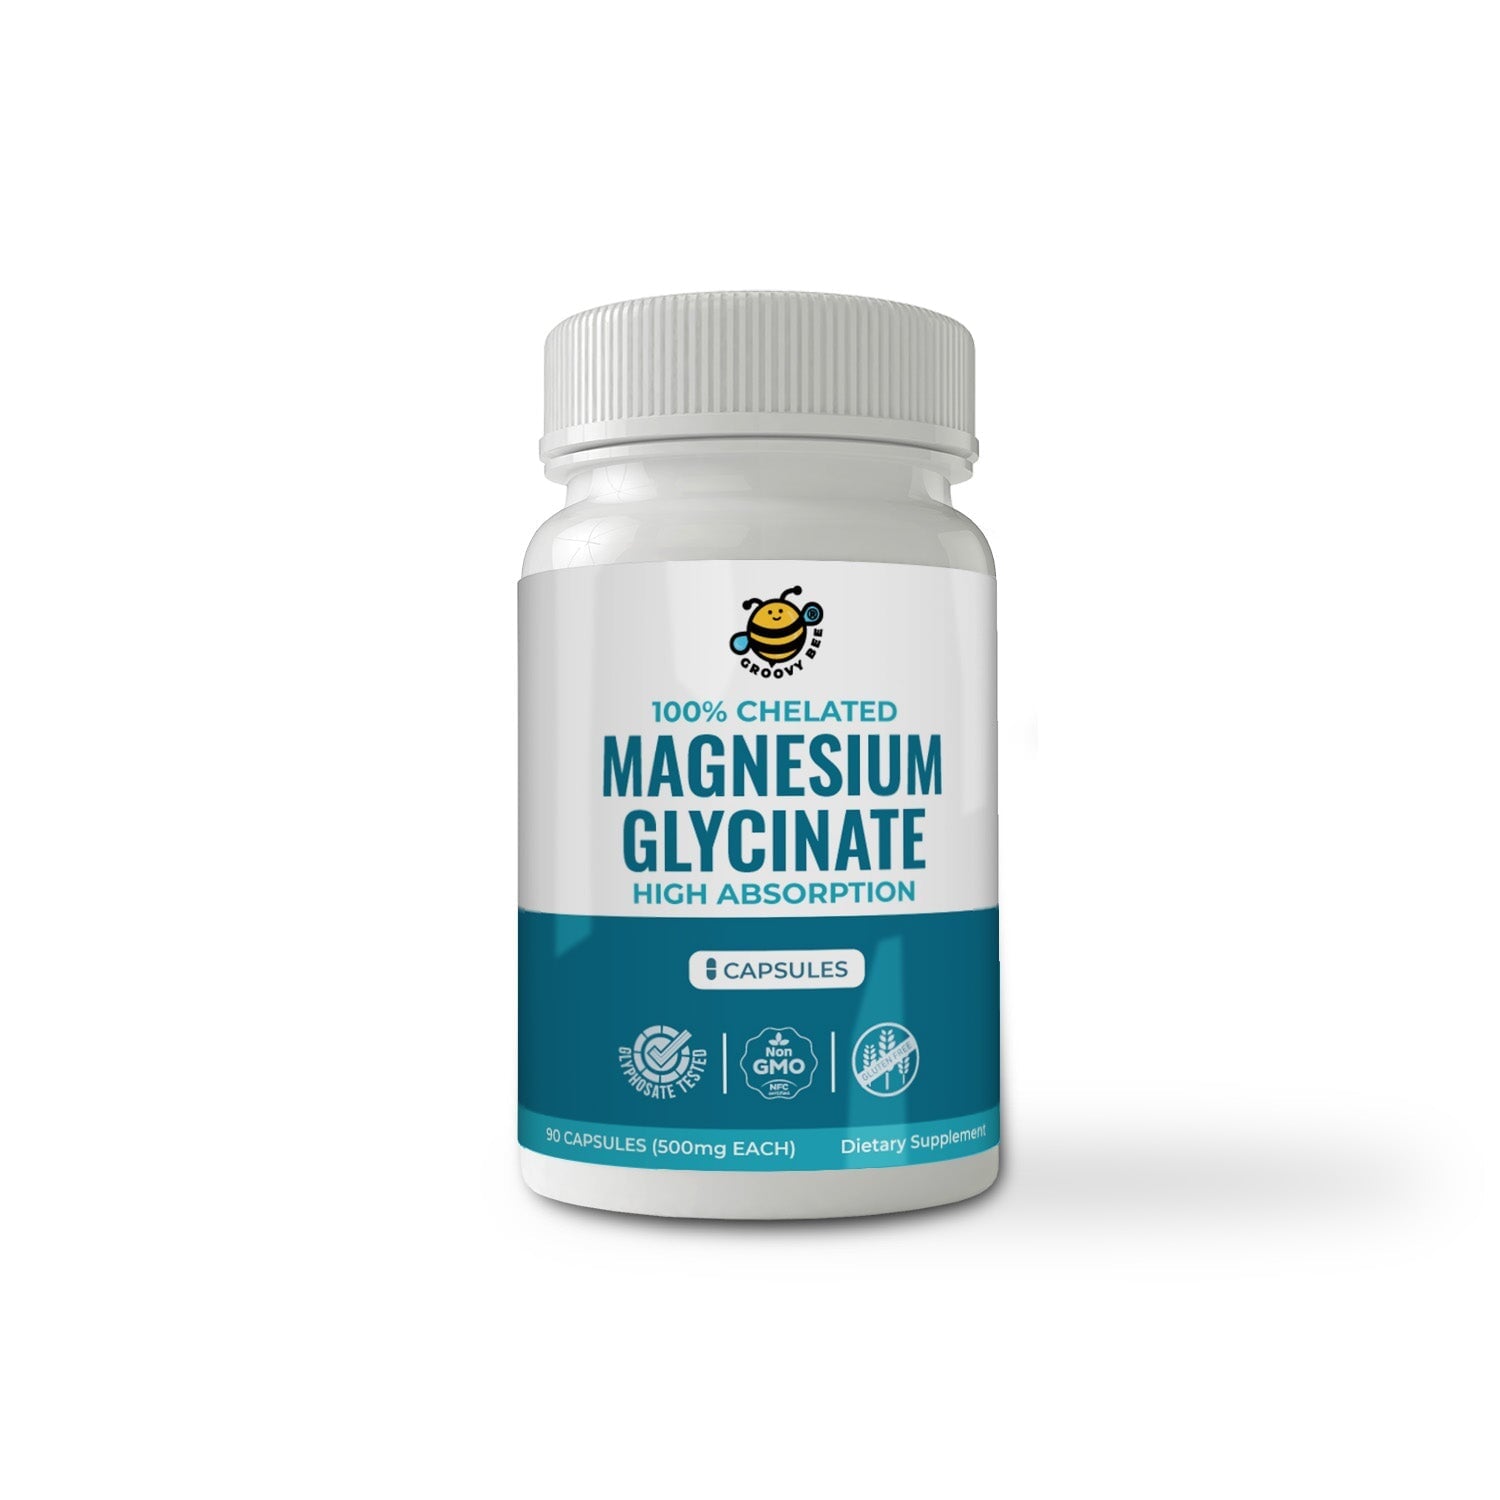 Magnesium Glycinate High Absorption 500mg 90 Caps Supplements Brighteon Store 